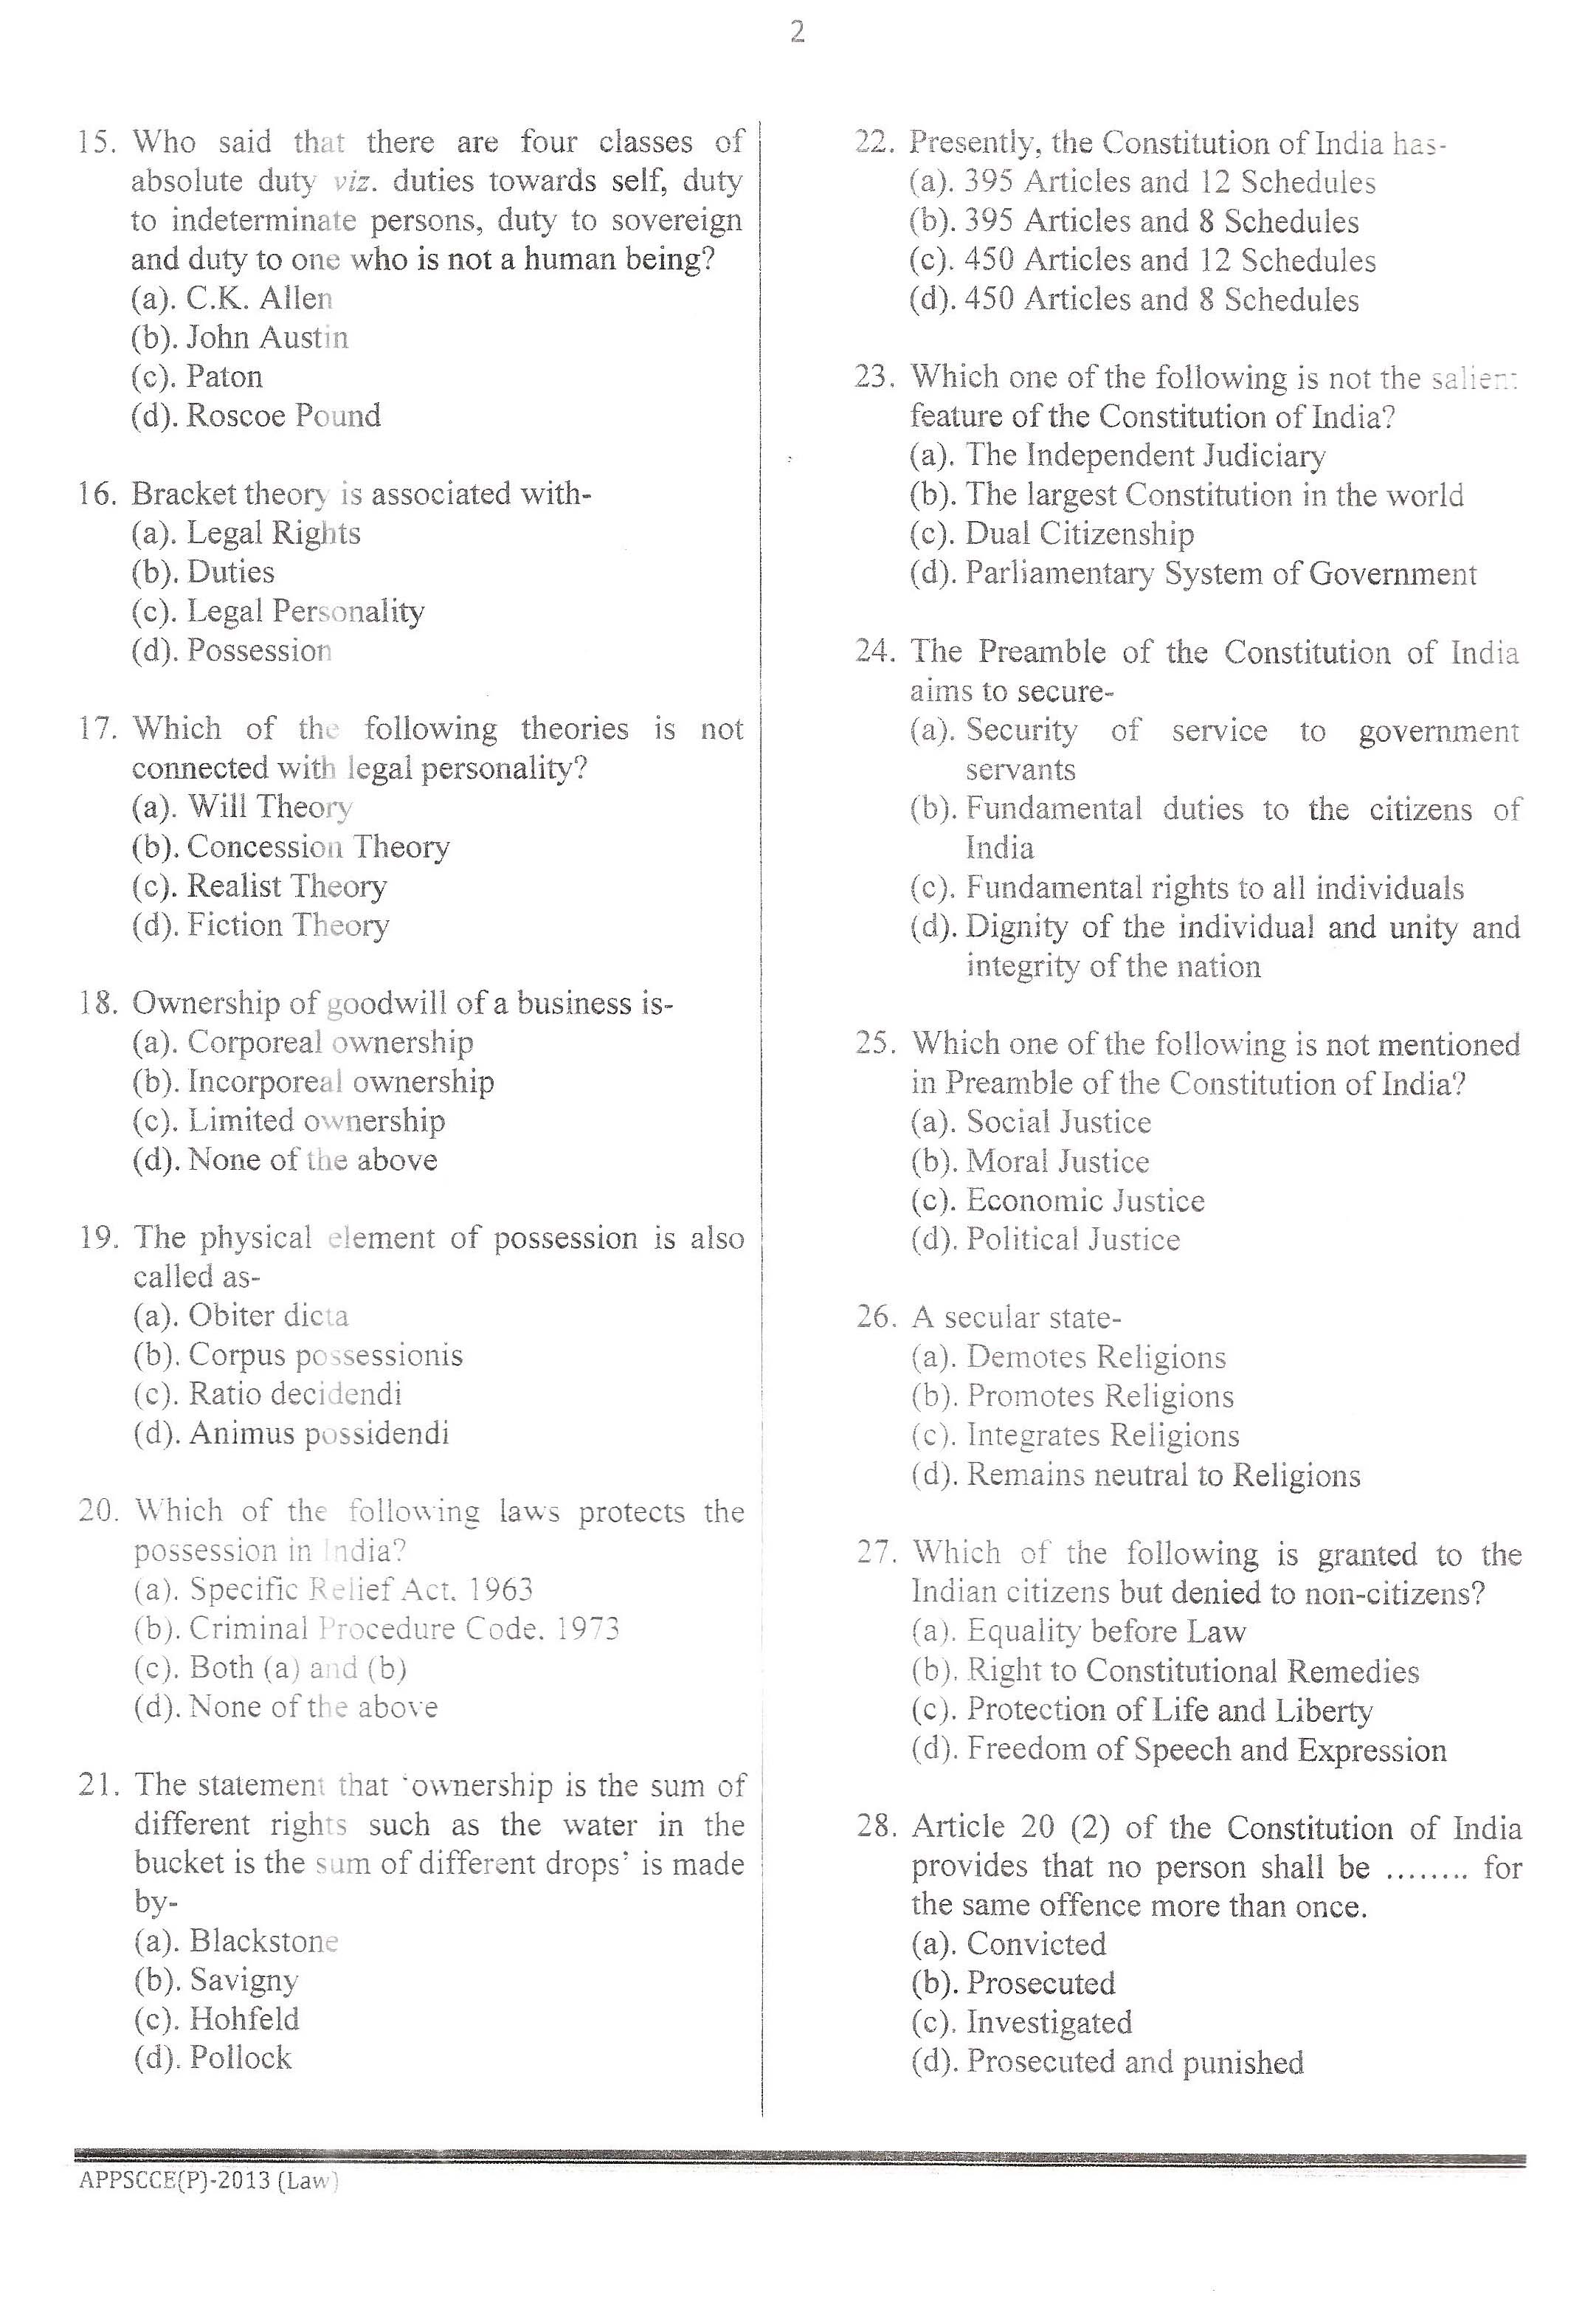 APPSC Combined Competitive Prelims Exam 2013 Law 3